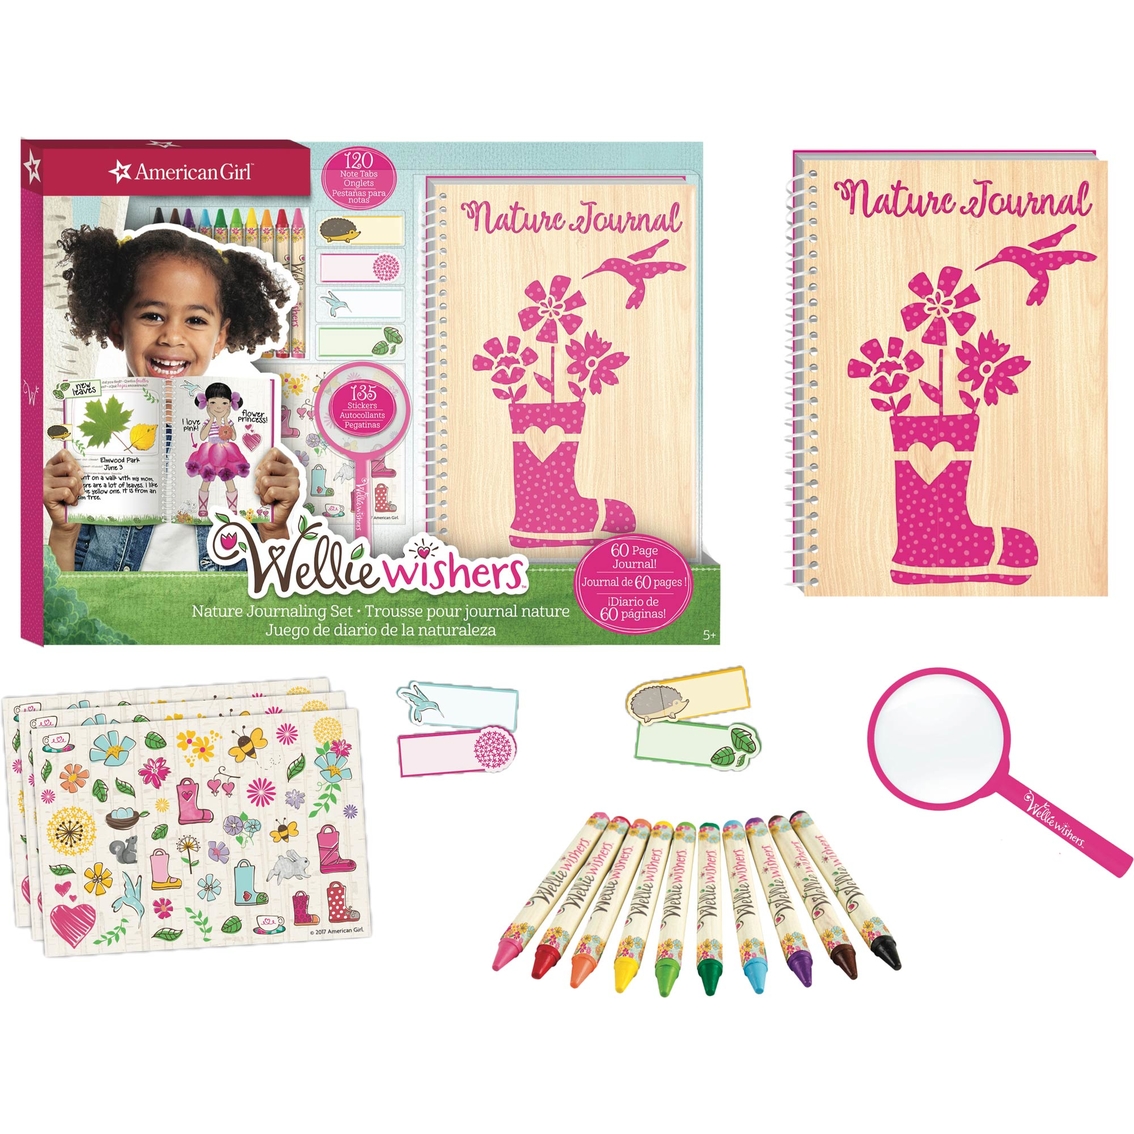 American Girl Wellie Wishers Nature Journaling Set - Image 2 of 2